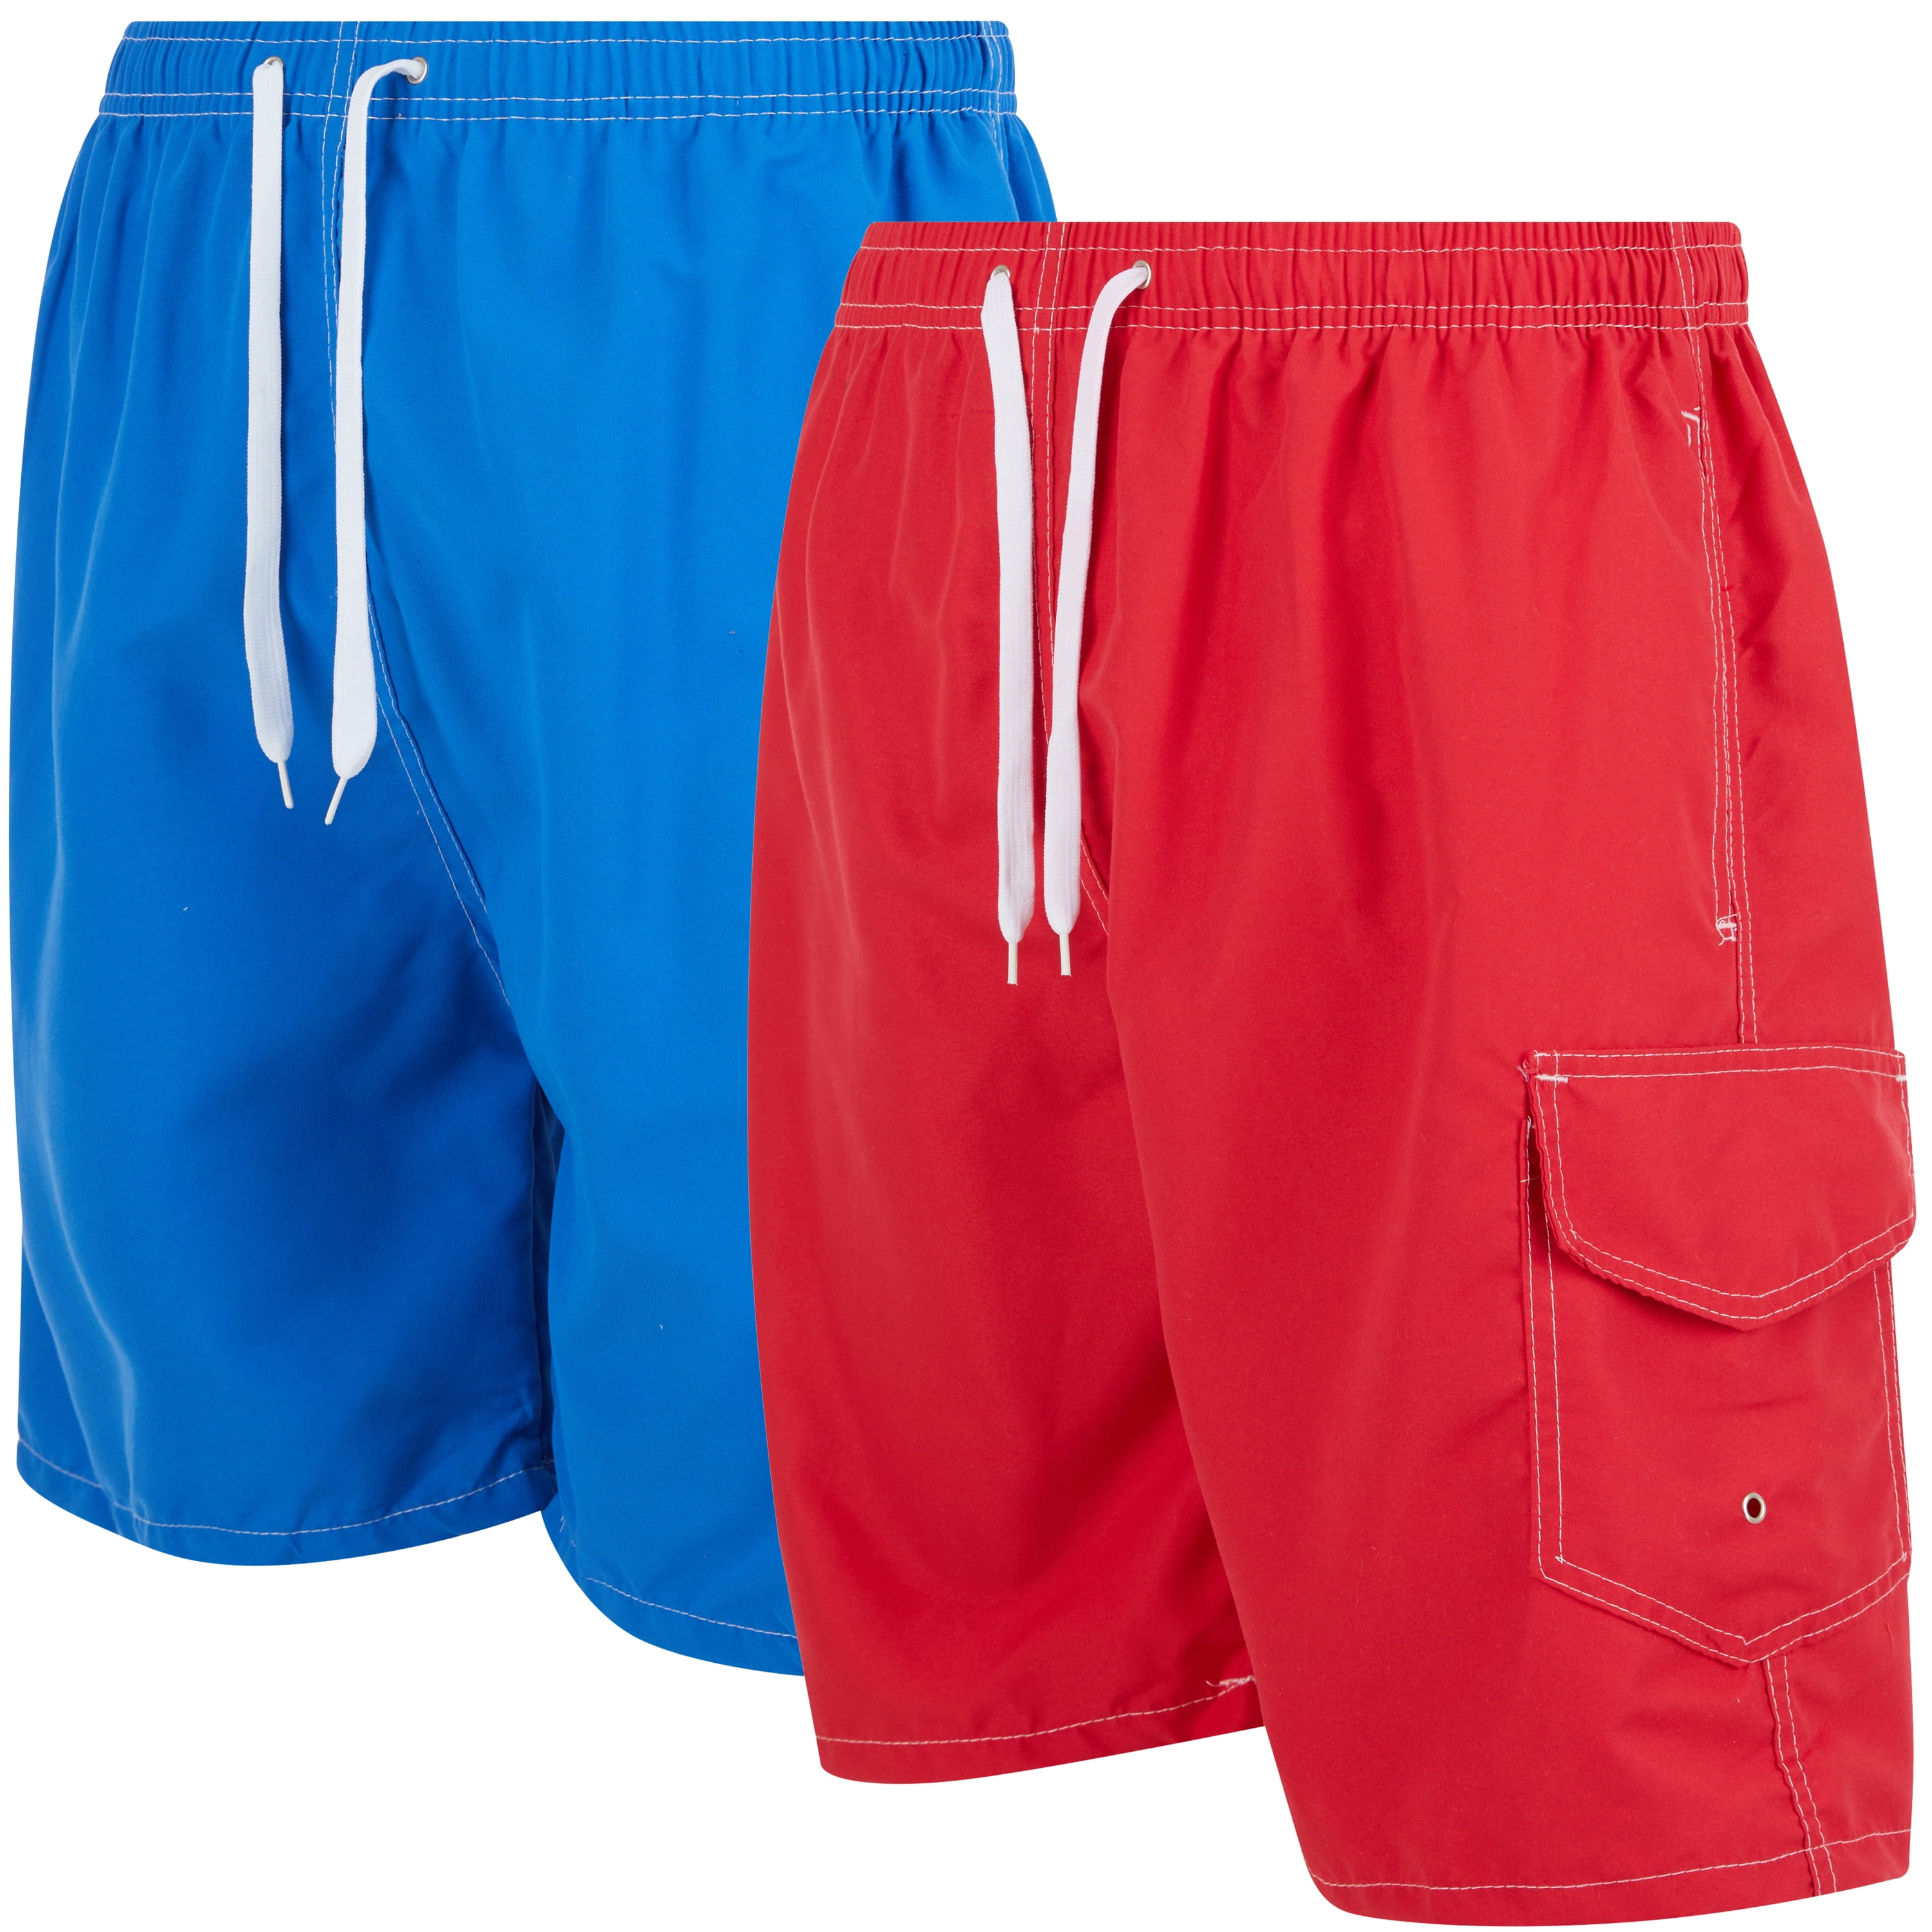 Men's Quick Dry Cargo Swim Trunks, Board Shorts with Mesh Lining, Blue/Red,  Large